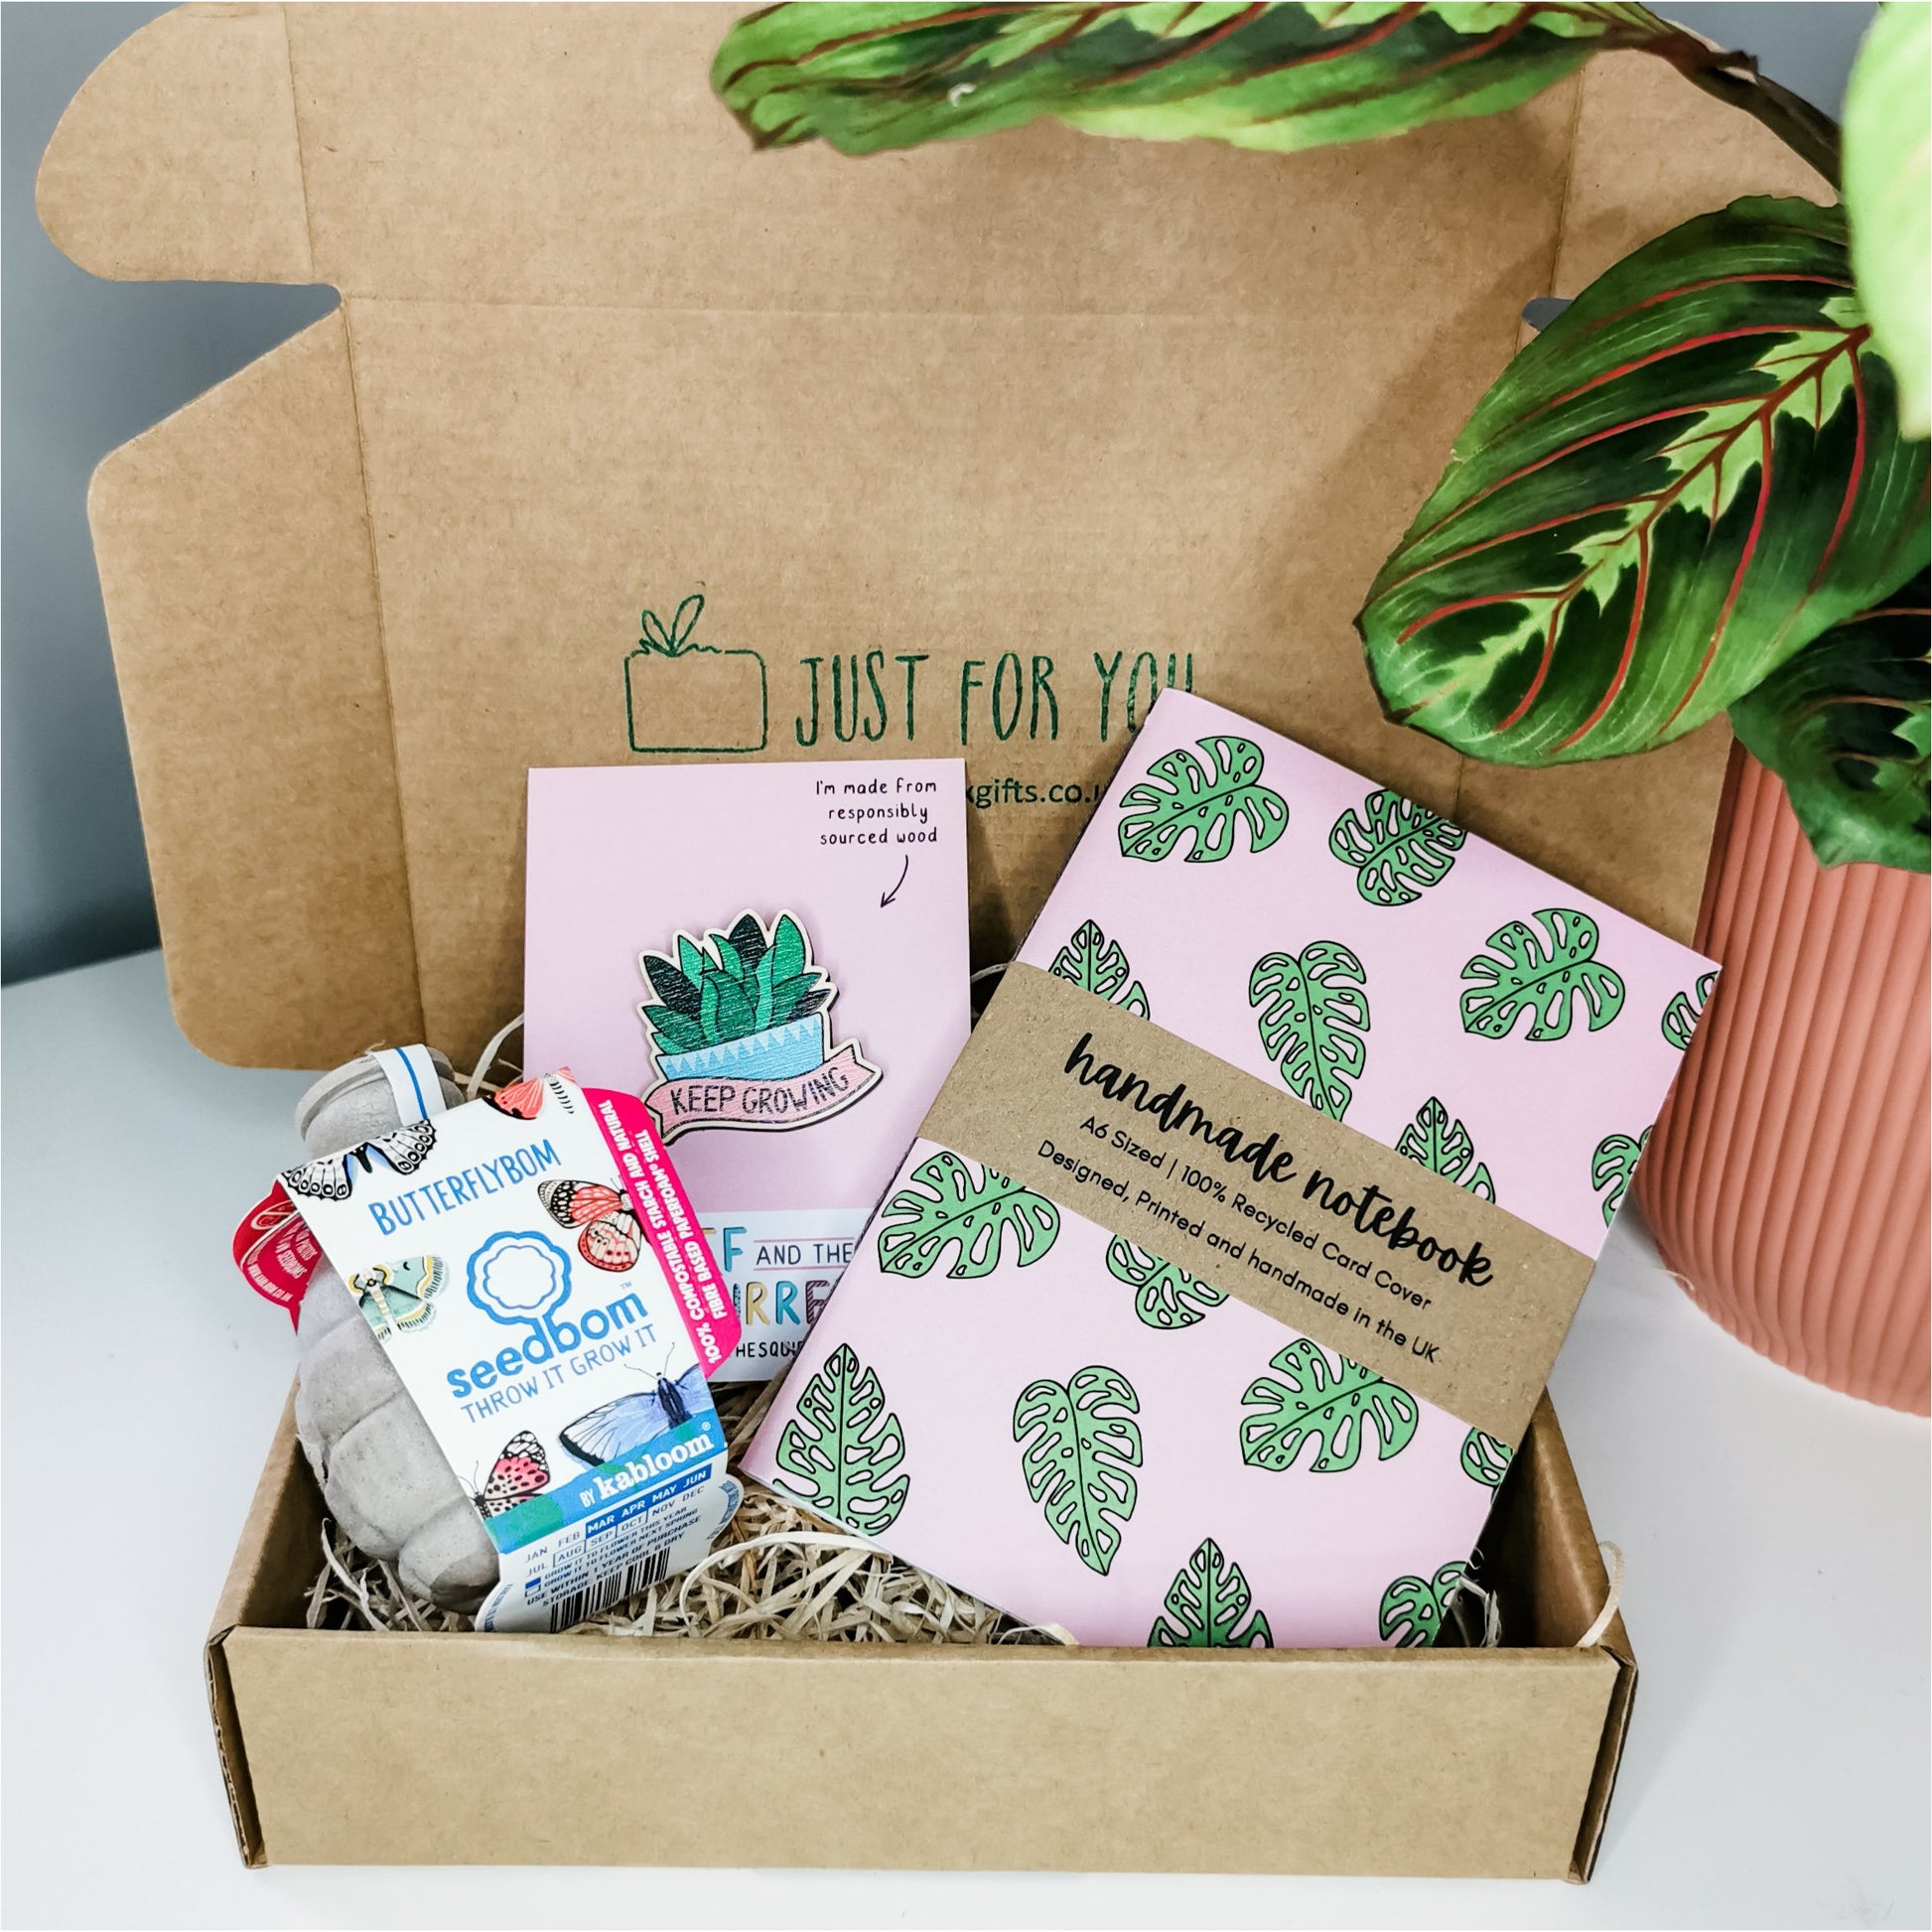 The Keep Growing Gift Box Buy at Out of the Box Gifts